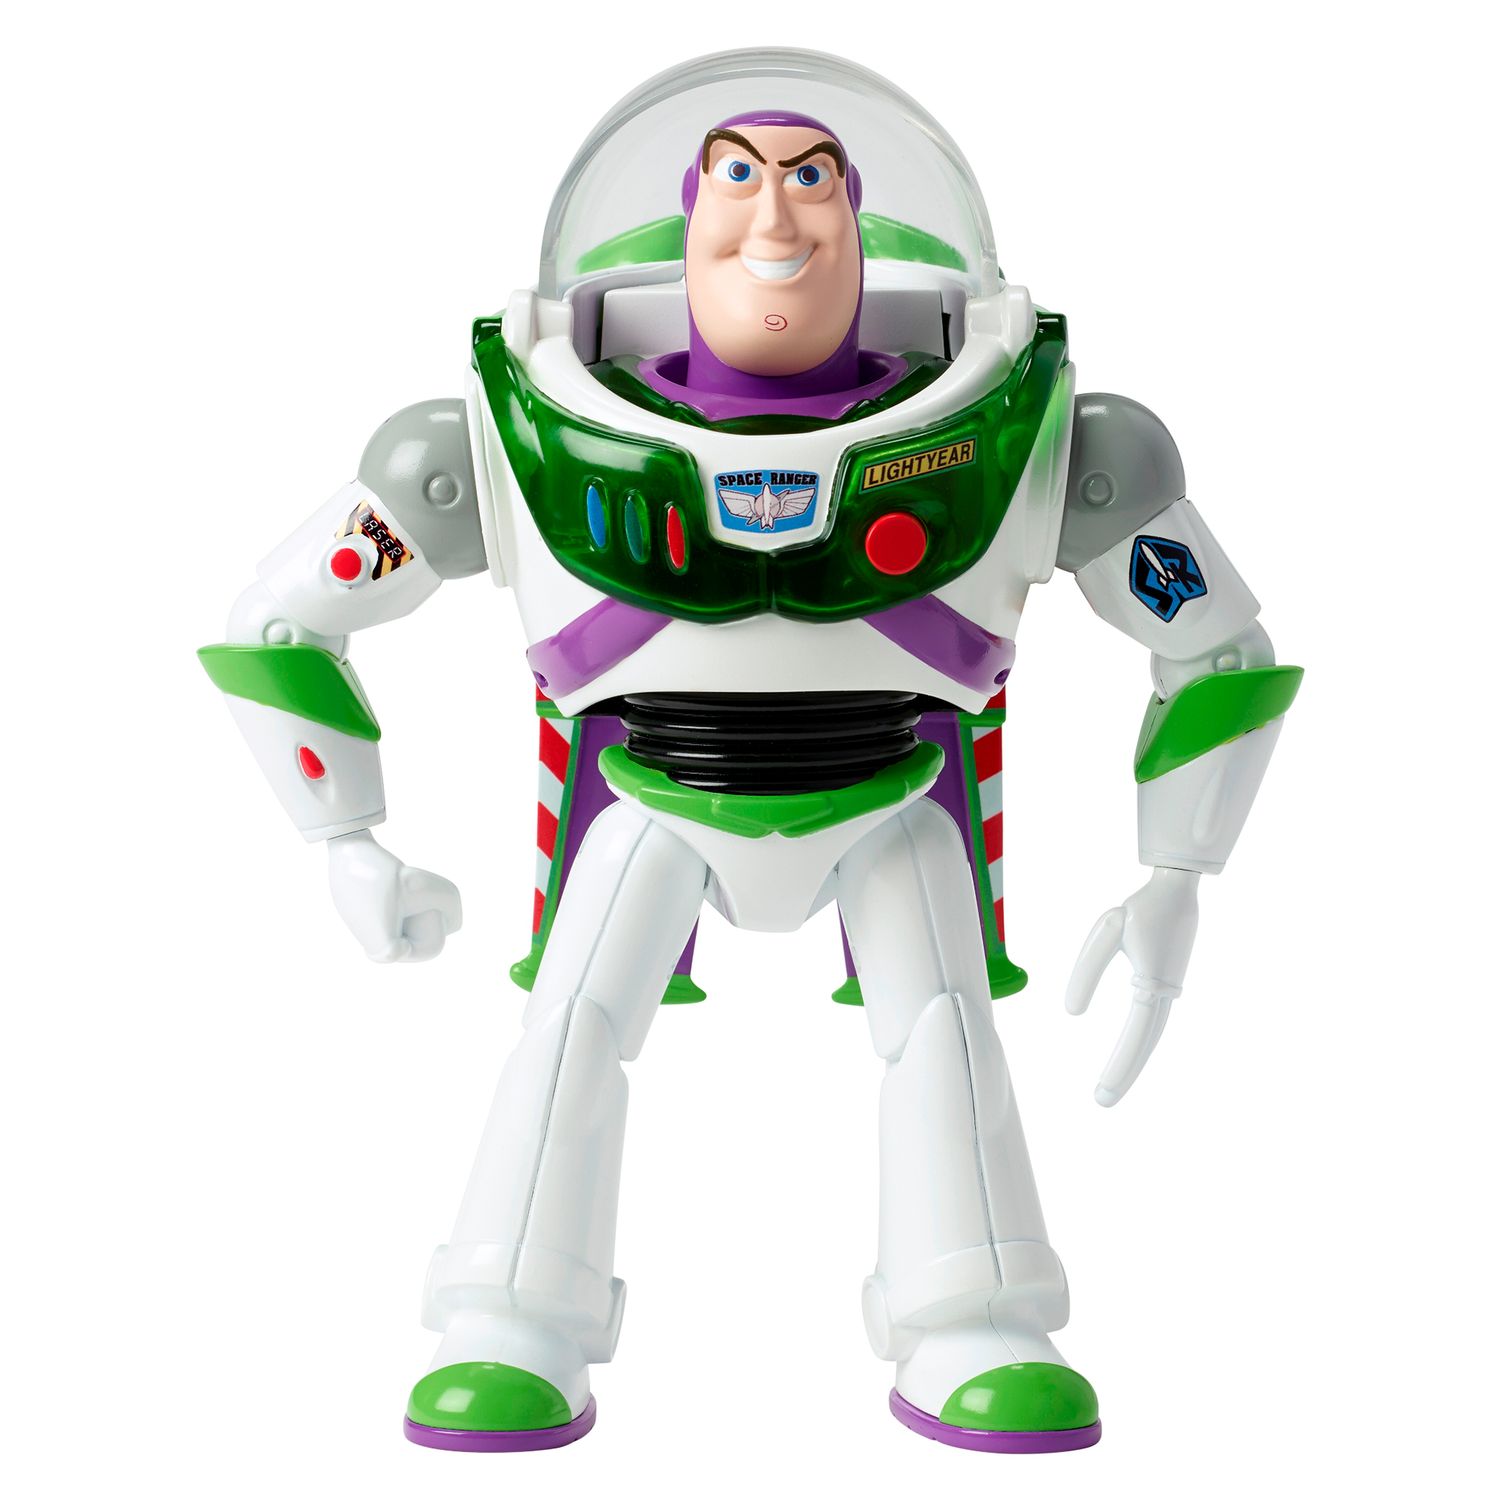 robot de buzz lightyear fisher price imaginext toy story 4